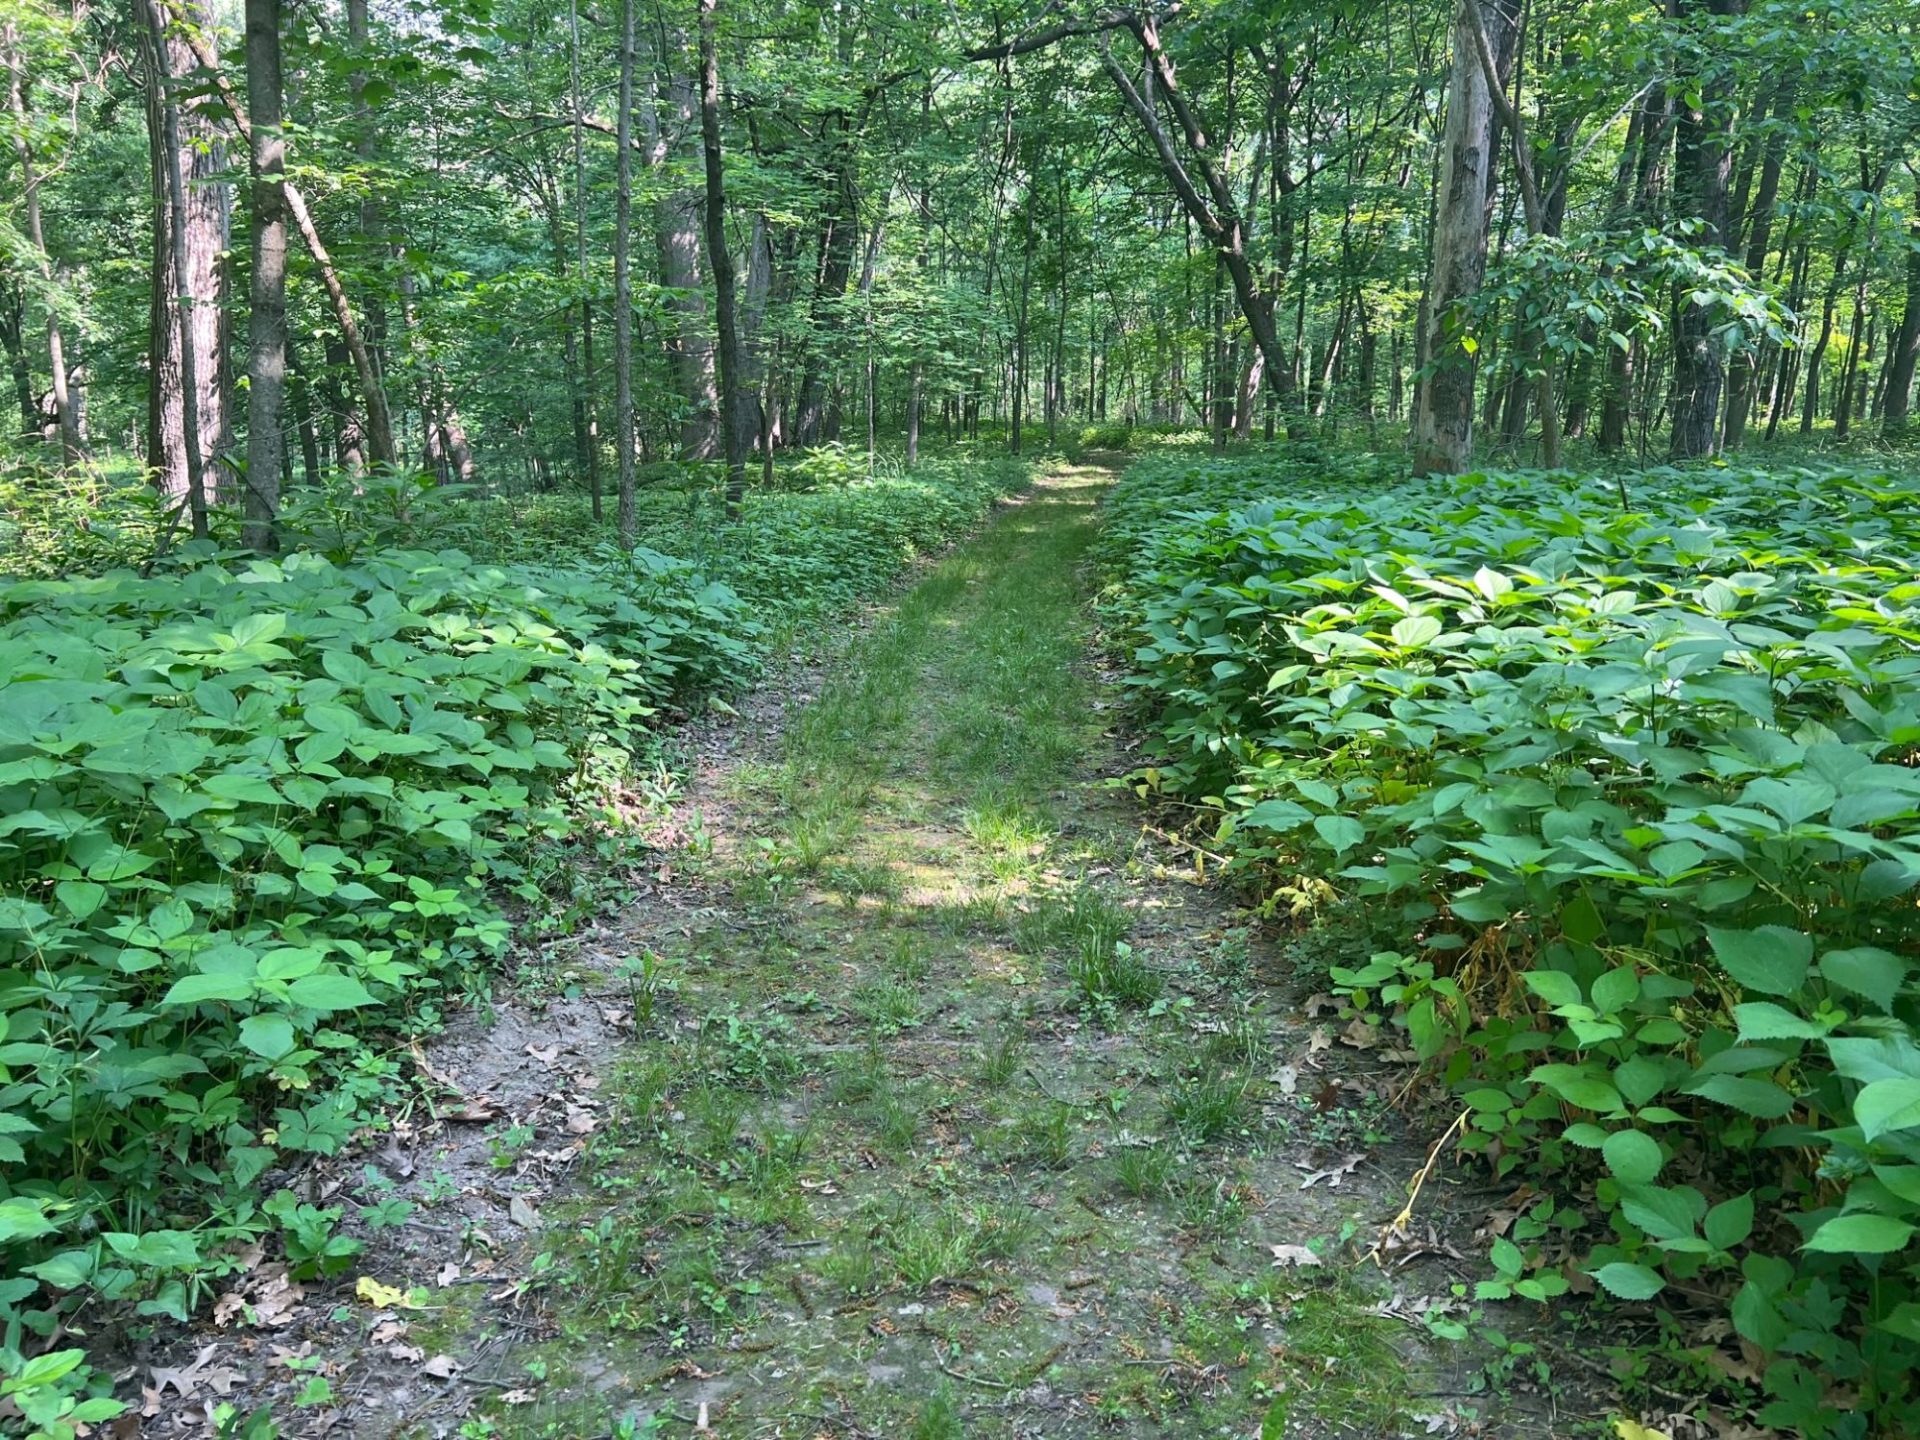 A dirt path with moss growing cuts through the woods. There are leafy plants on either side of it, and tall thin trees in the distance.